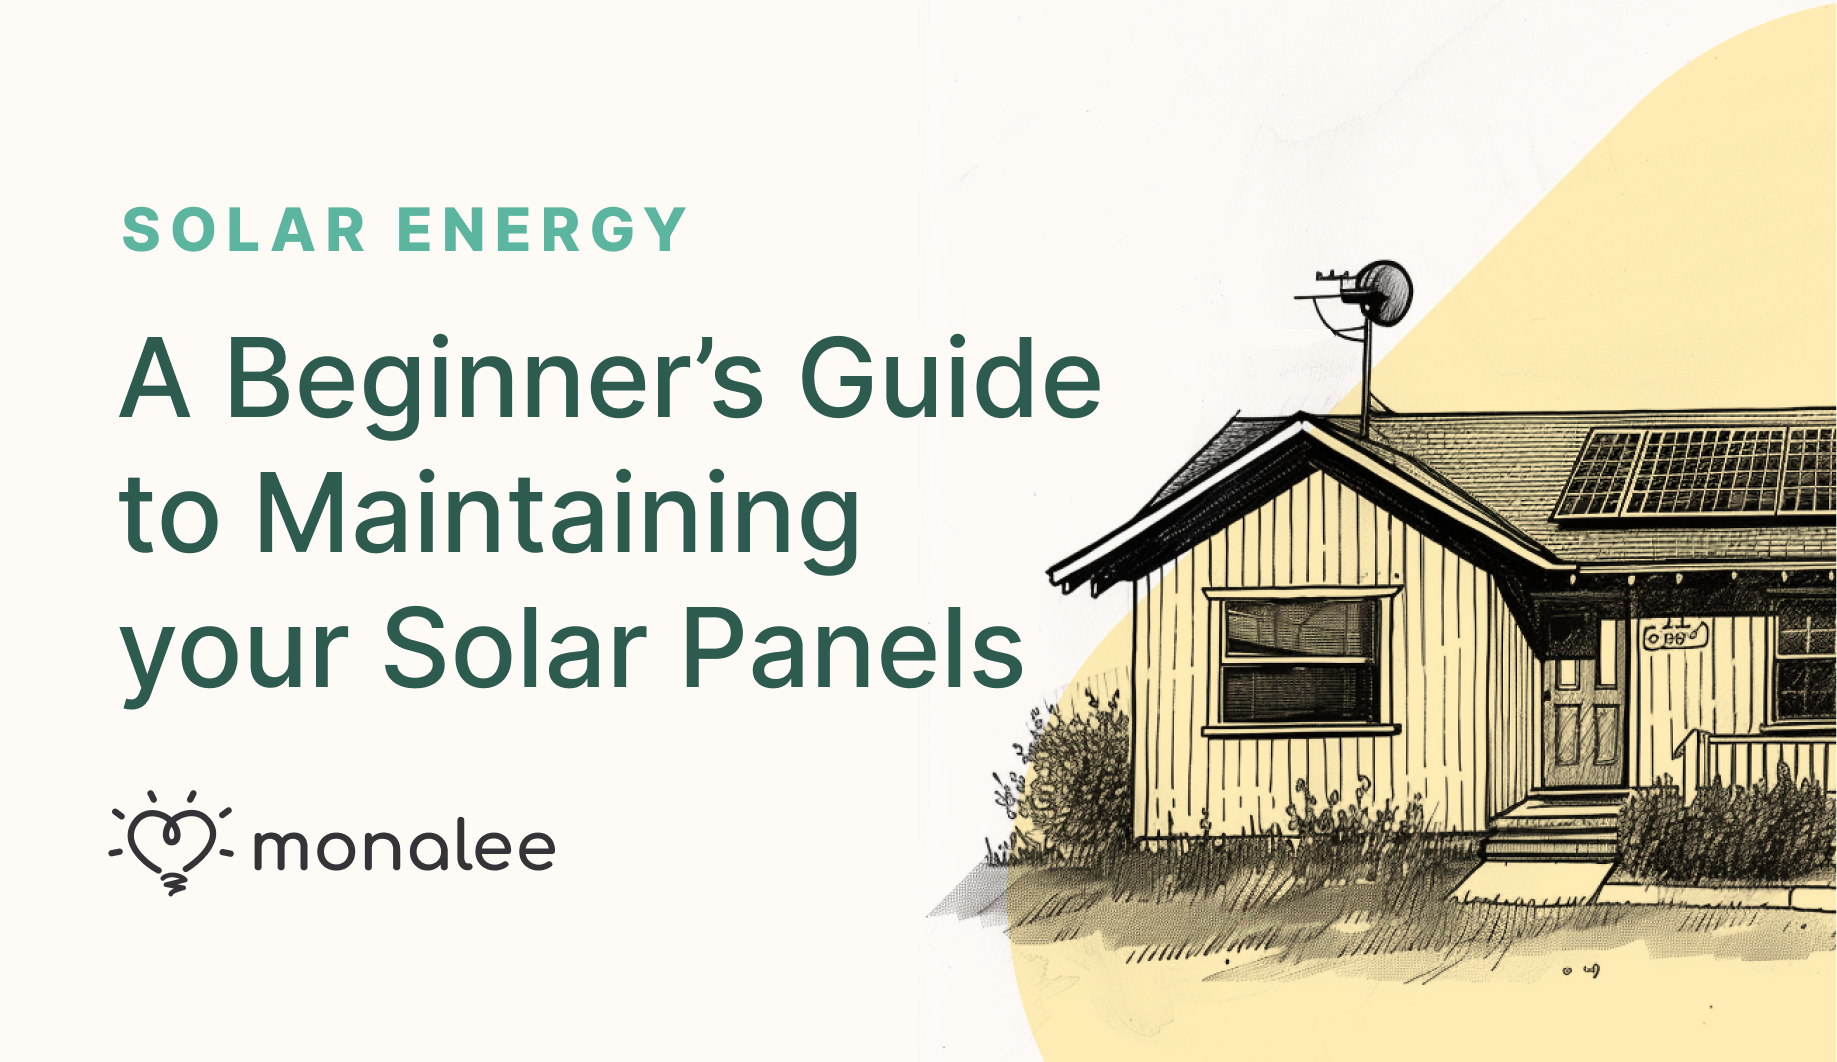 A Beginner’s Guide to Maintaining Your Solar Panels